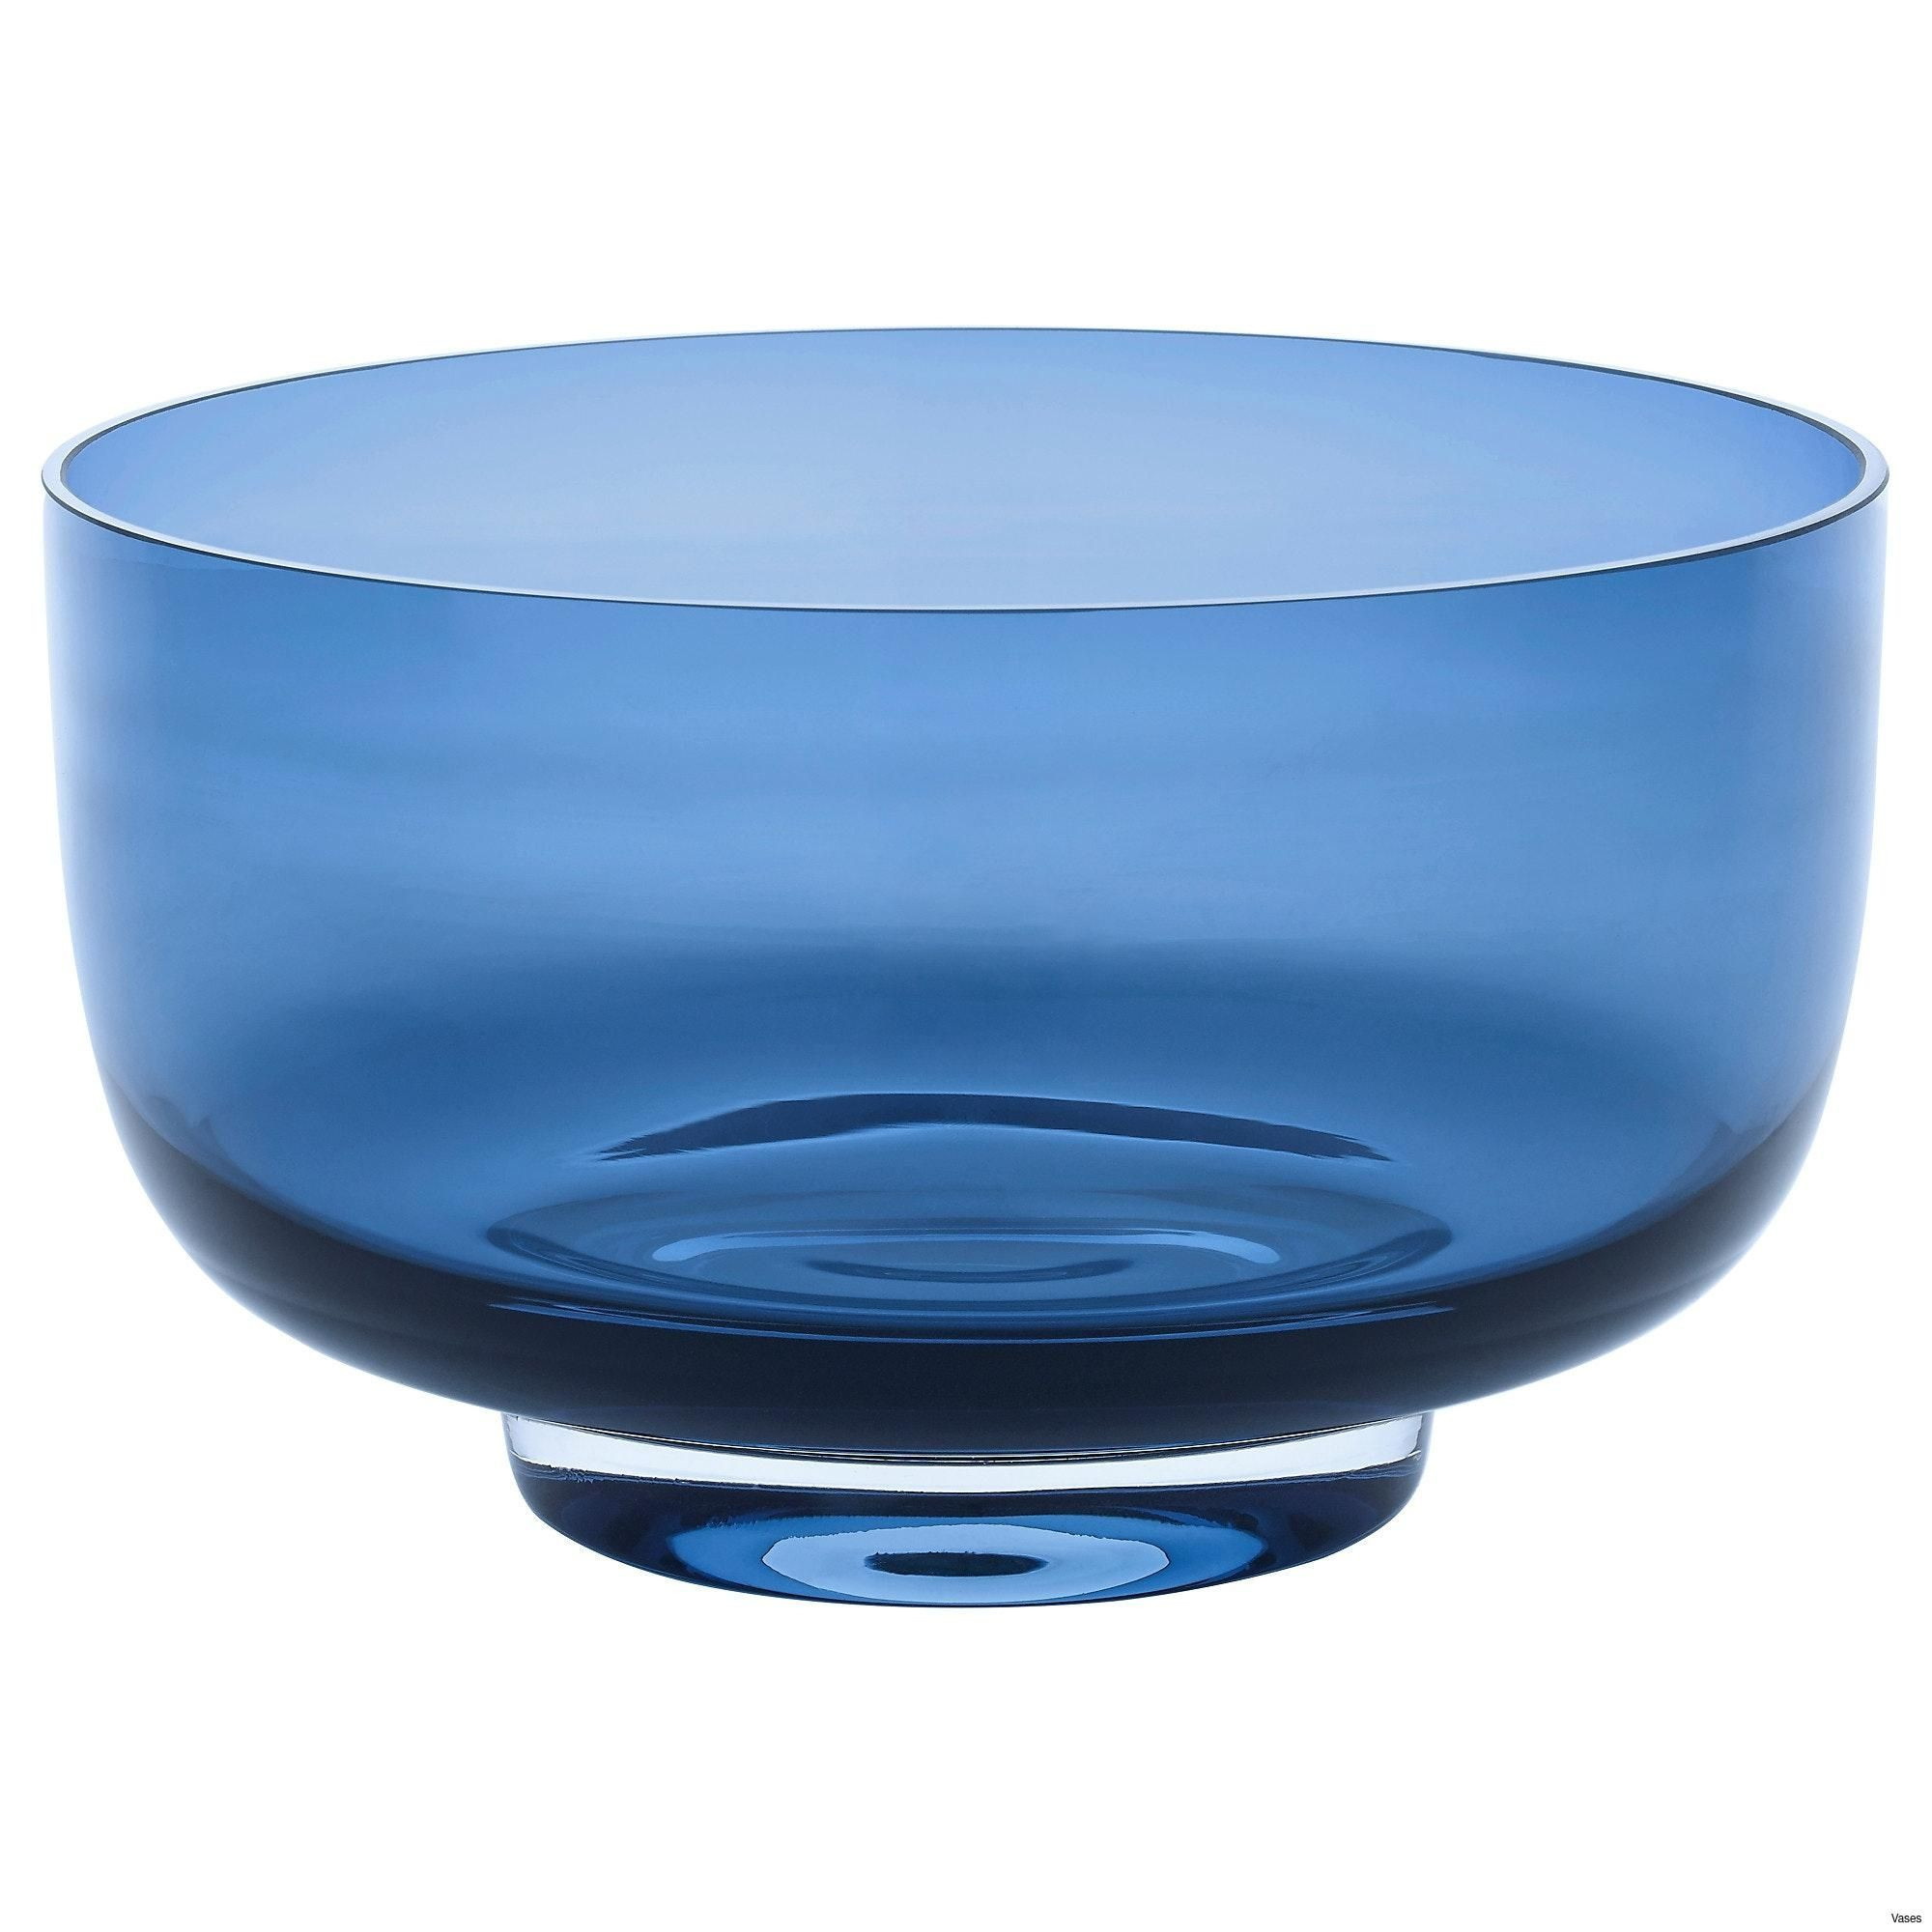 23 attractive Colored Glass Vases wholesale 2023 free download colored glass vases wholesale of 23 blue crystal vase the weekly world with regard to decorative glass bowl new living room ikea vases awesome pe s5h